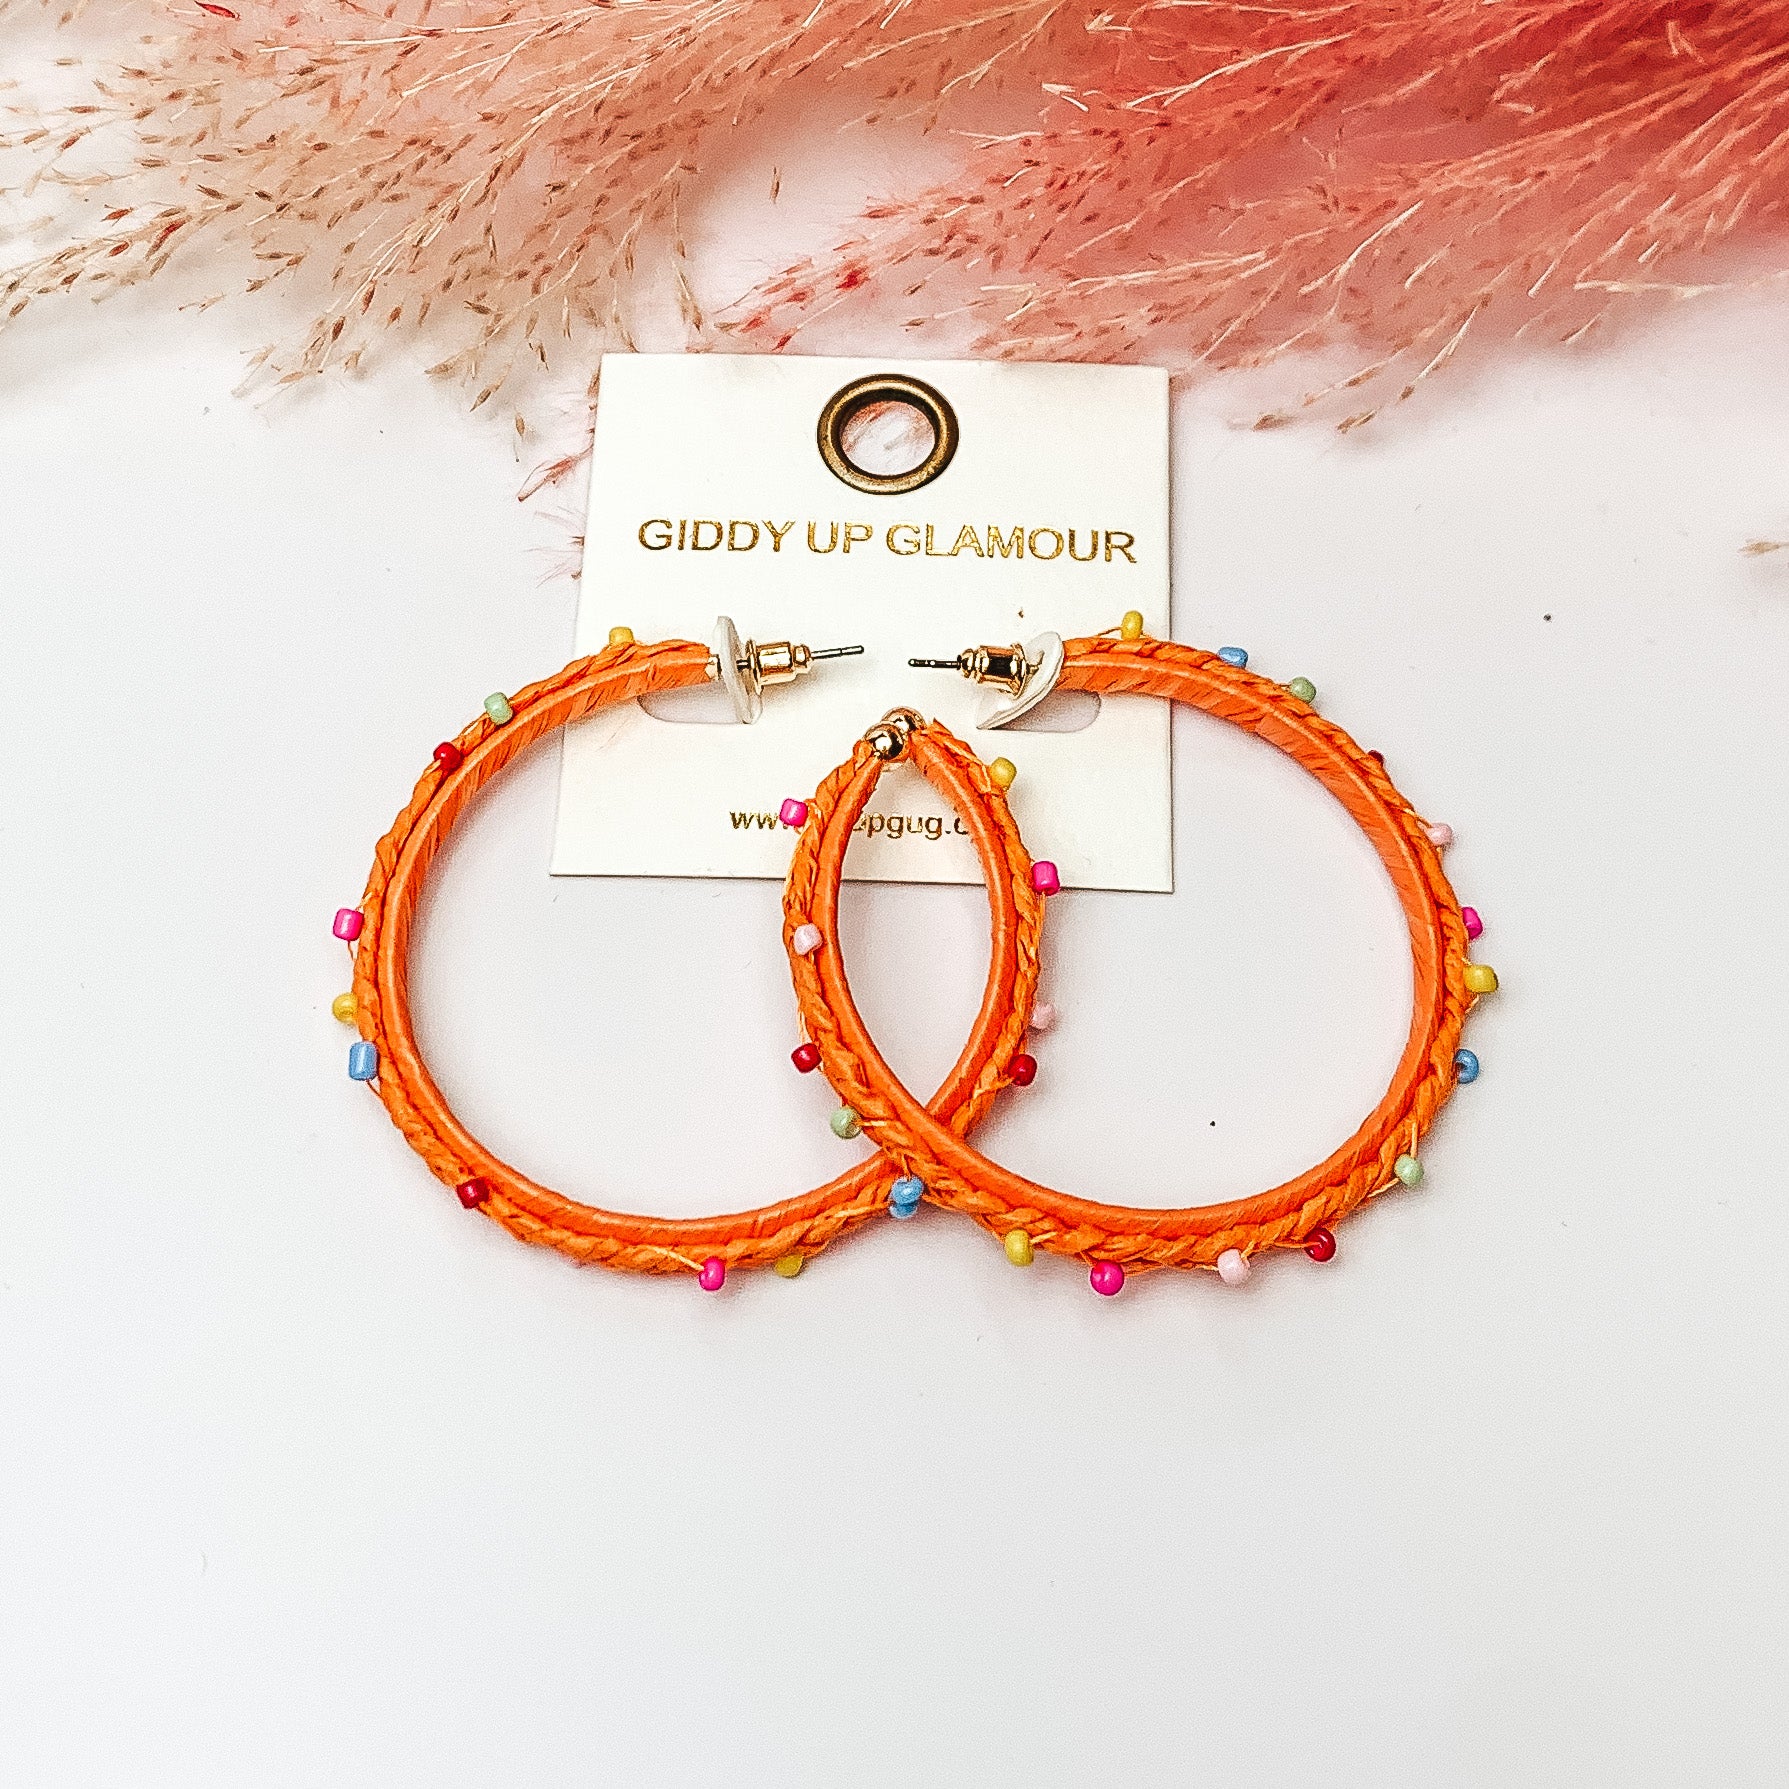 Pictured are raffia braided hoop earrings in orange with colorful beads. They are pictured with a pink feather on a white background.